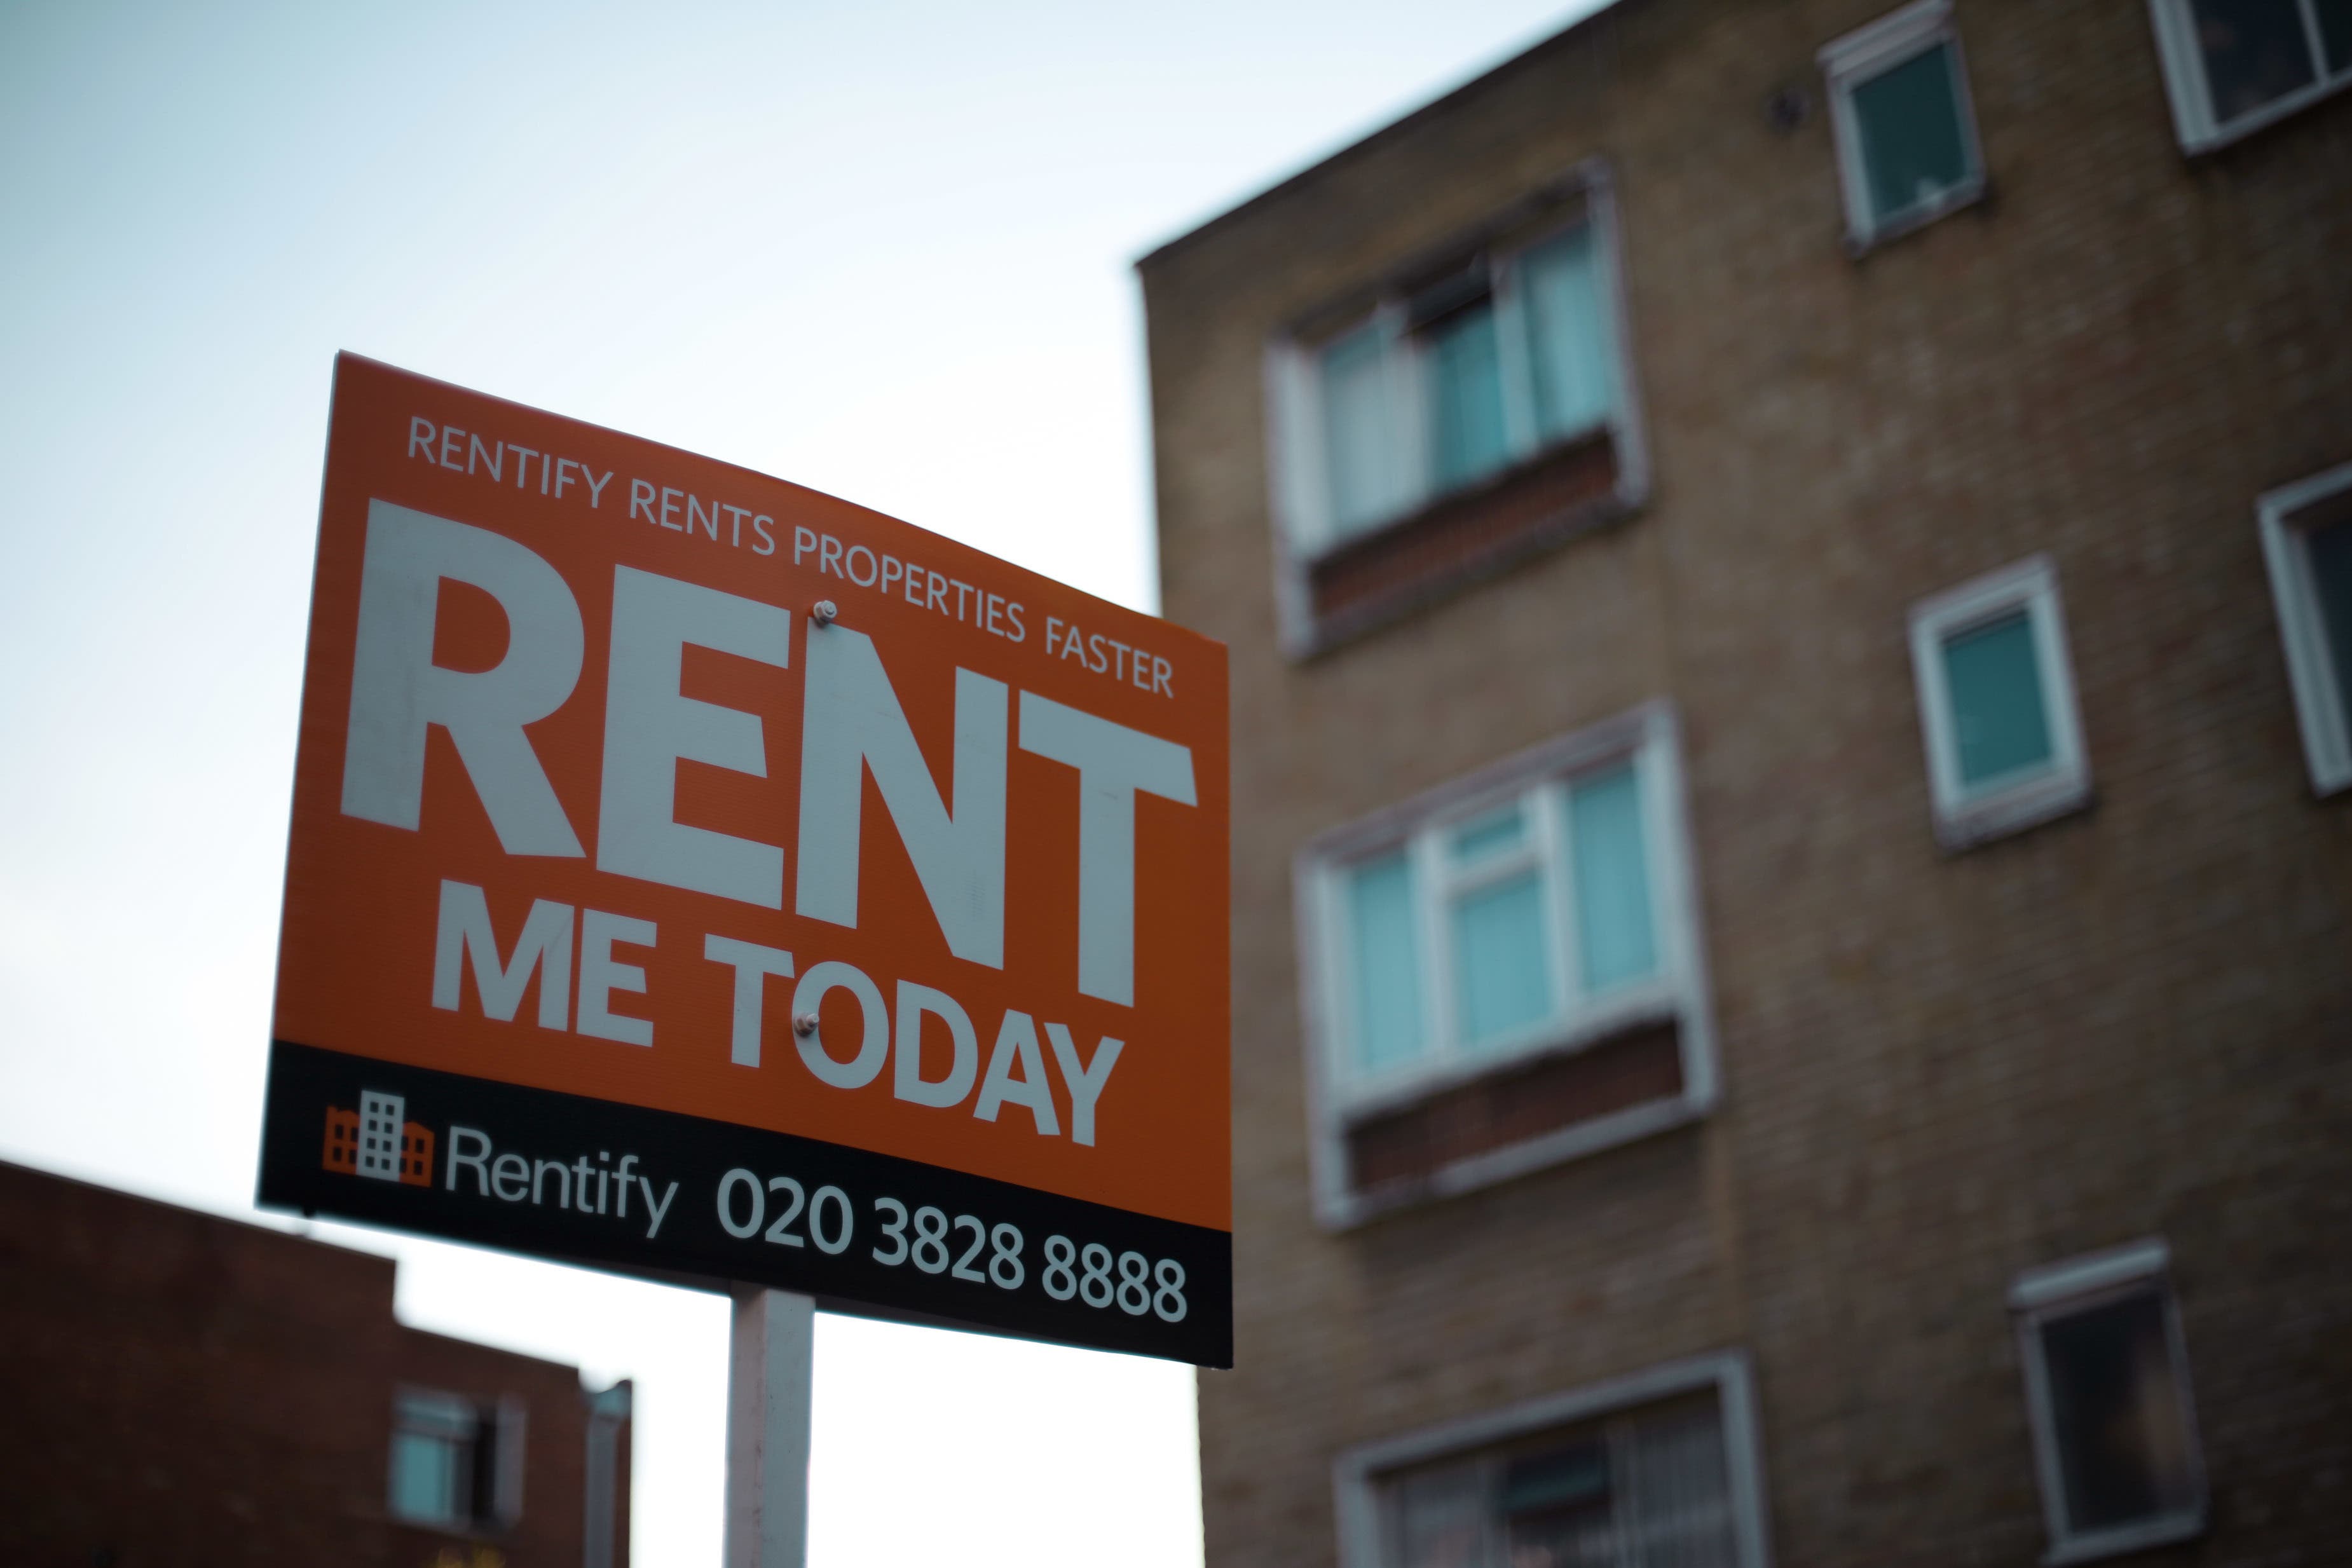 Generation Rent found that black people are 36 per cent less likely to receive a positive response when applying to rent on SpareRoom